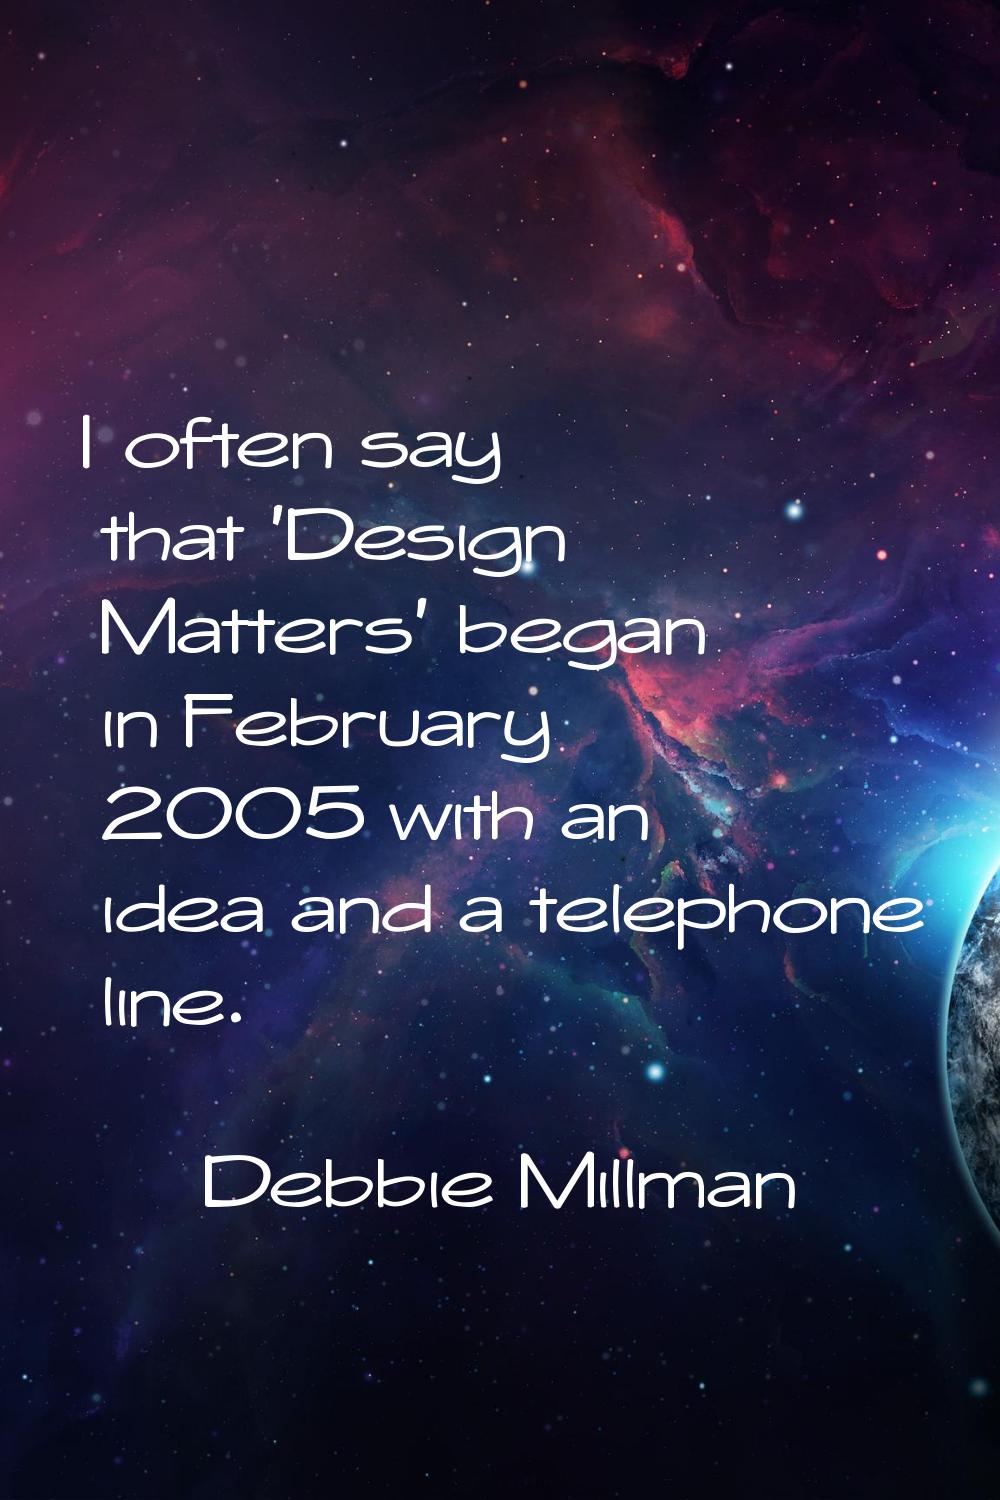 I often say that 'Design Matters' began in February 2005 with an idea and a telephone line.